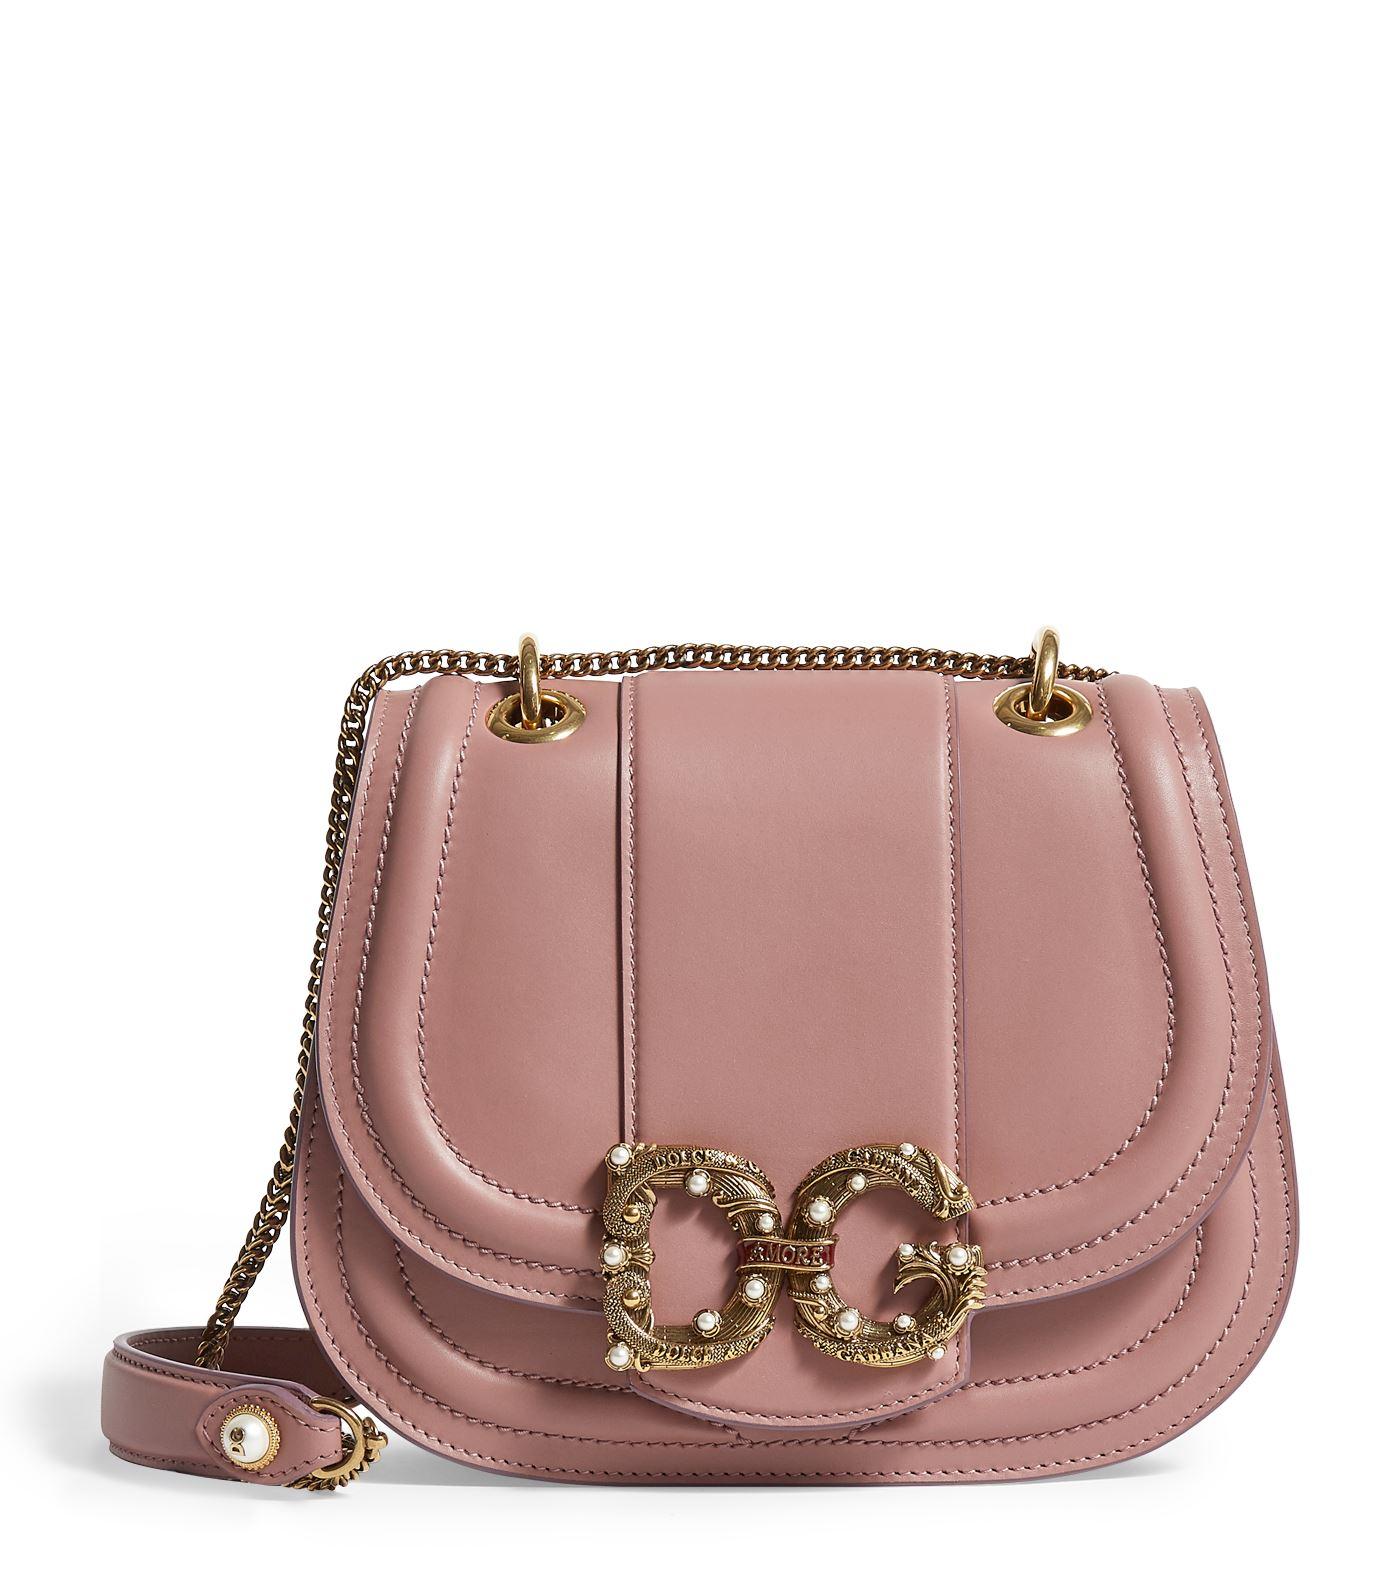 Dolce & Gabbana Leather Amore Bag in Pink - Lyst